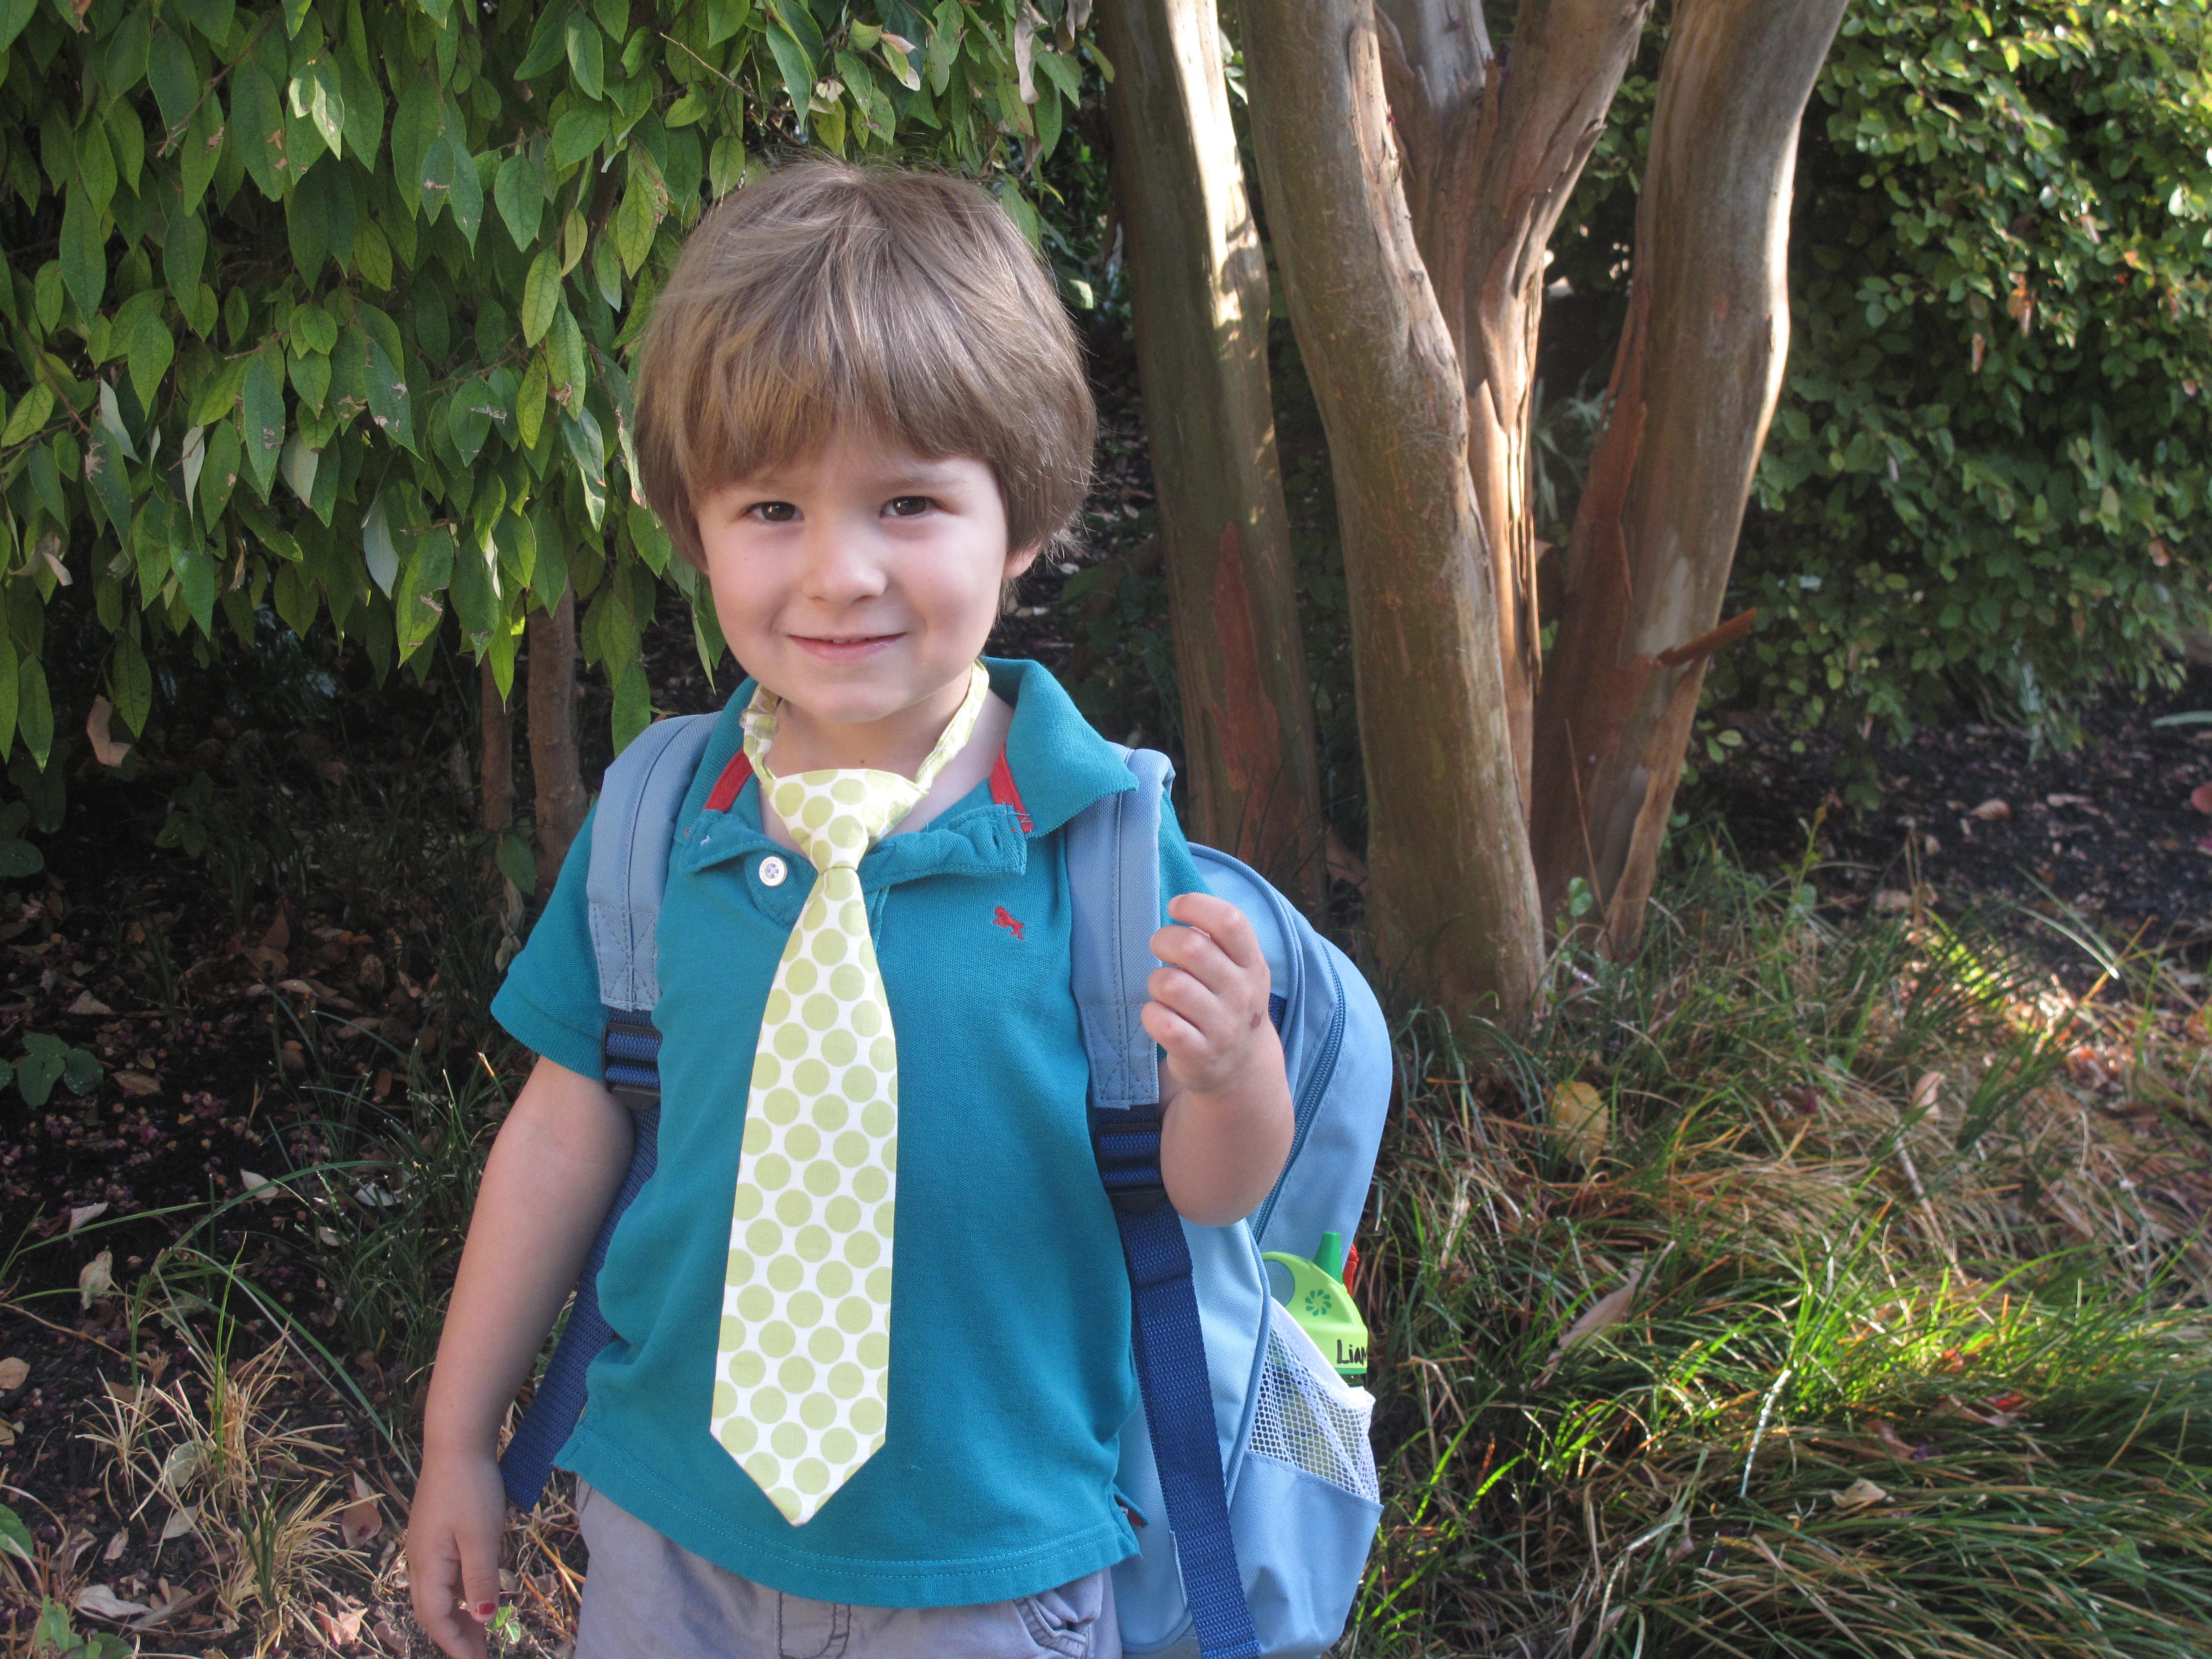 Free photo A boy with a backpack and a tie.